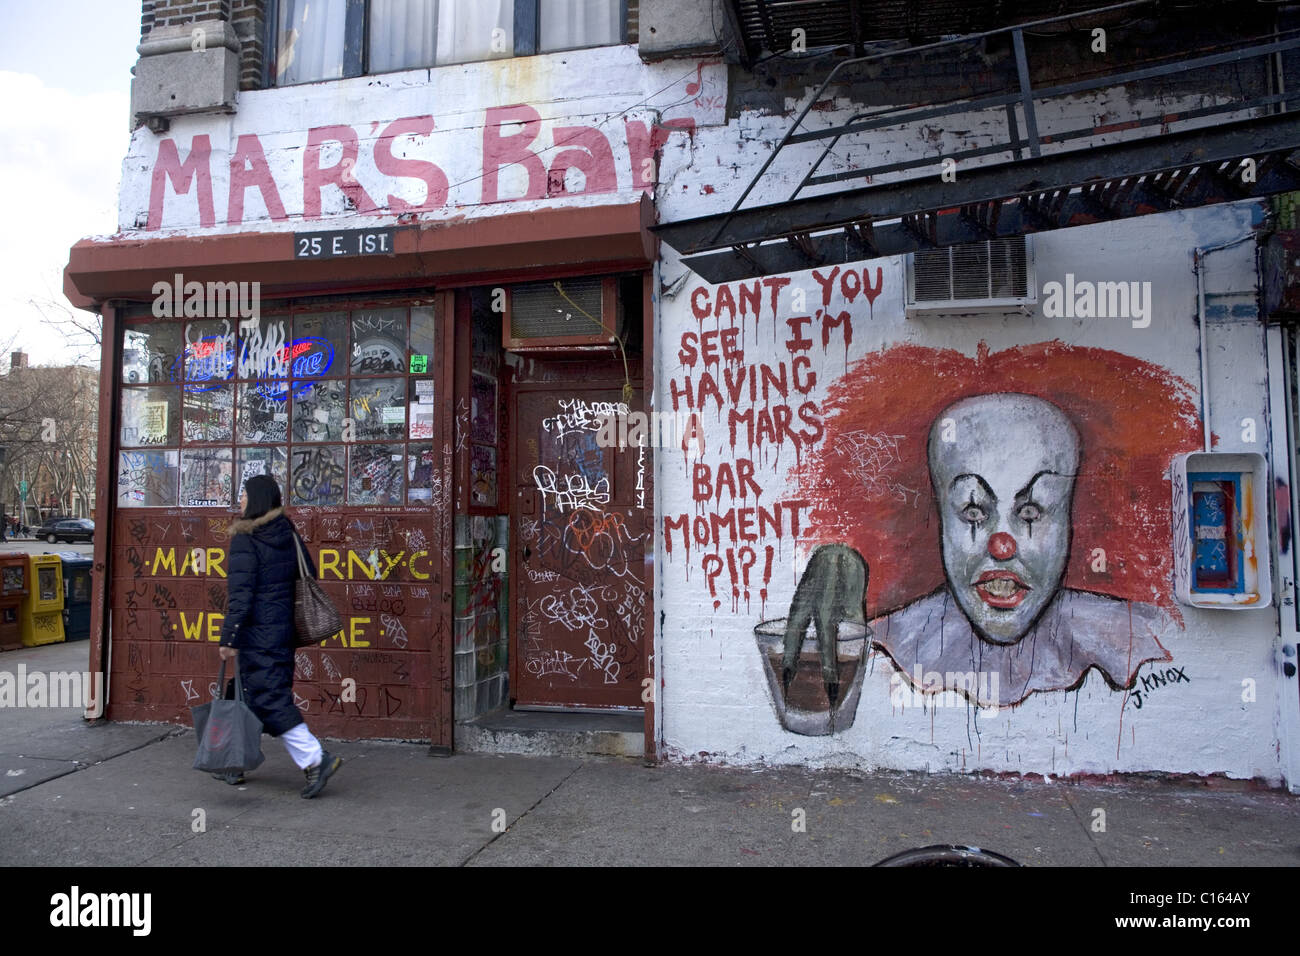 The famous Mars Bar, 1st St. & 2nd Ave. East Village, NYC. Stock Photo